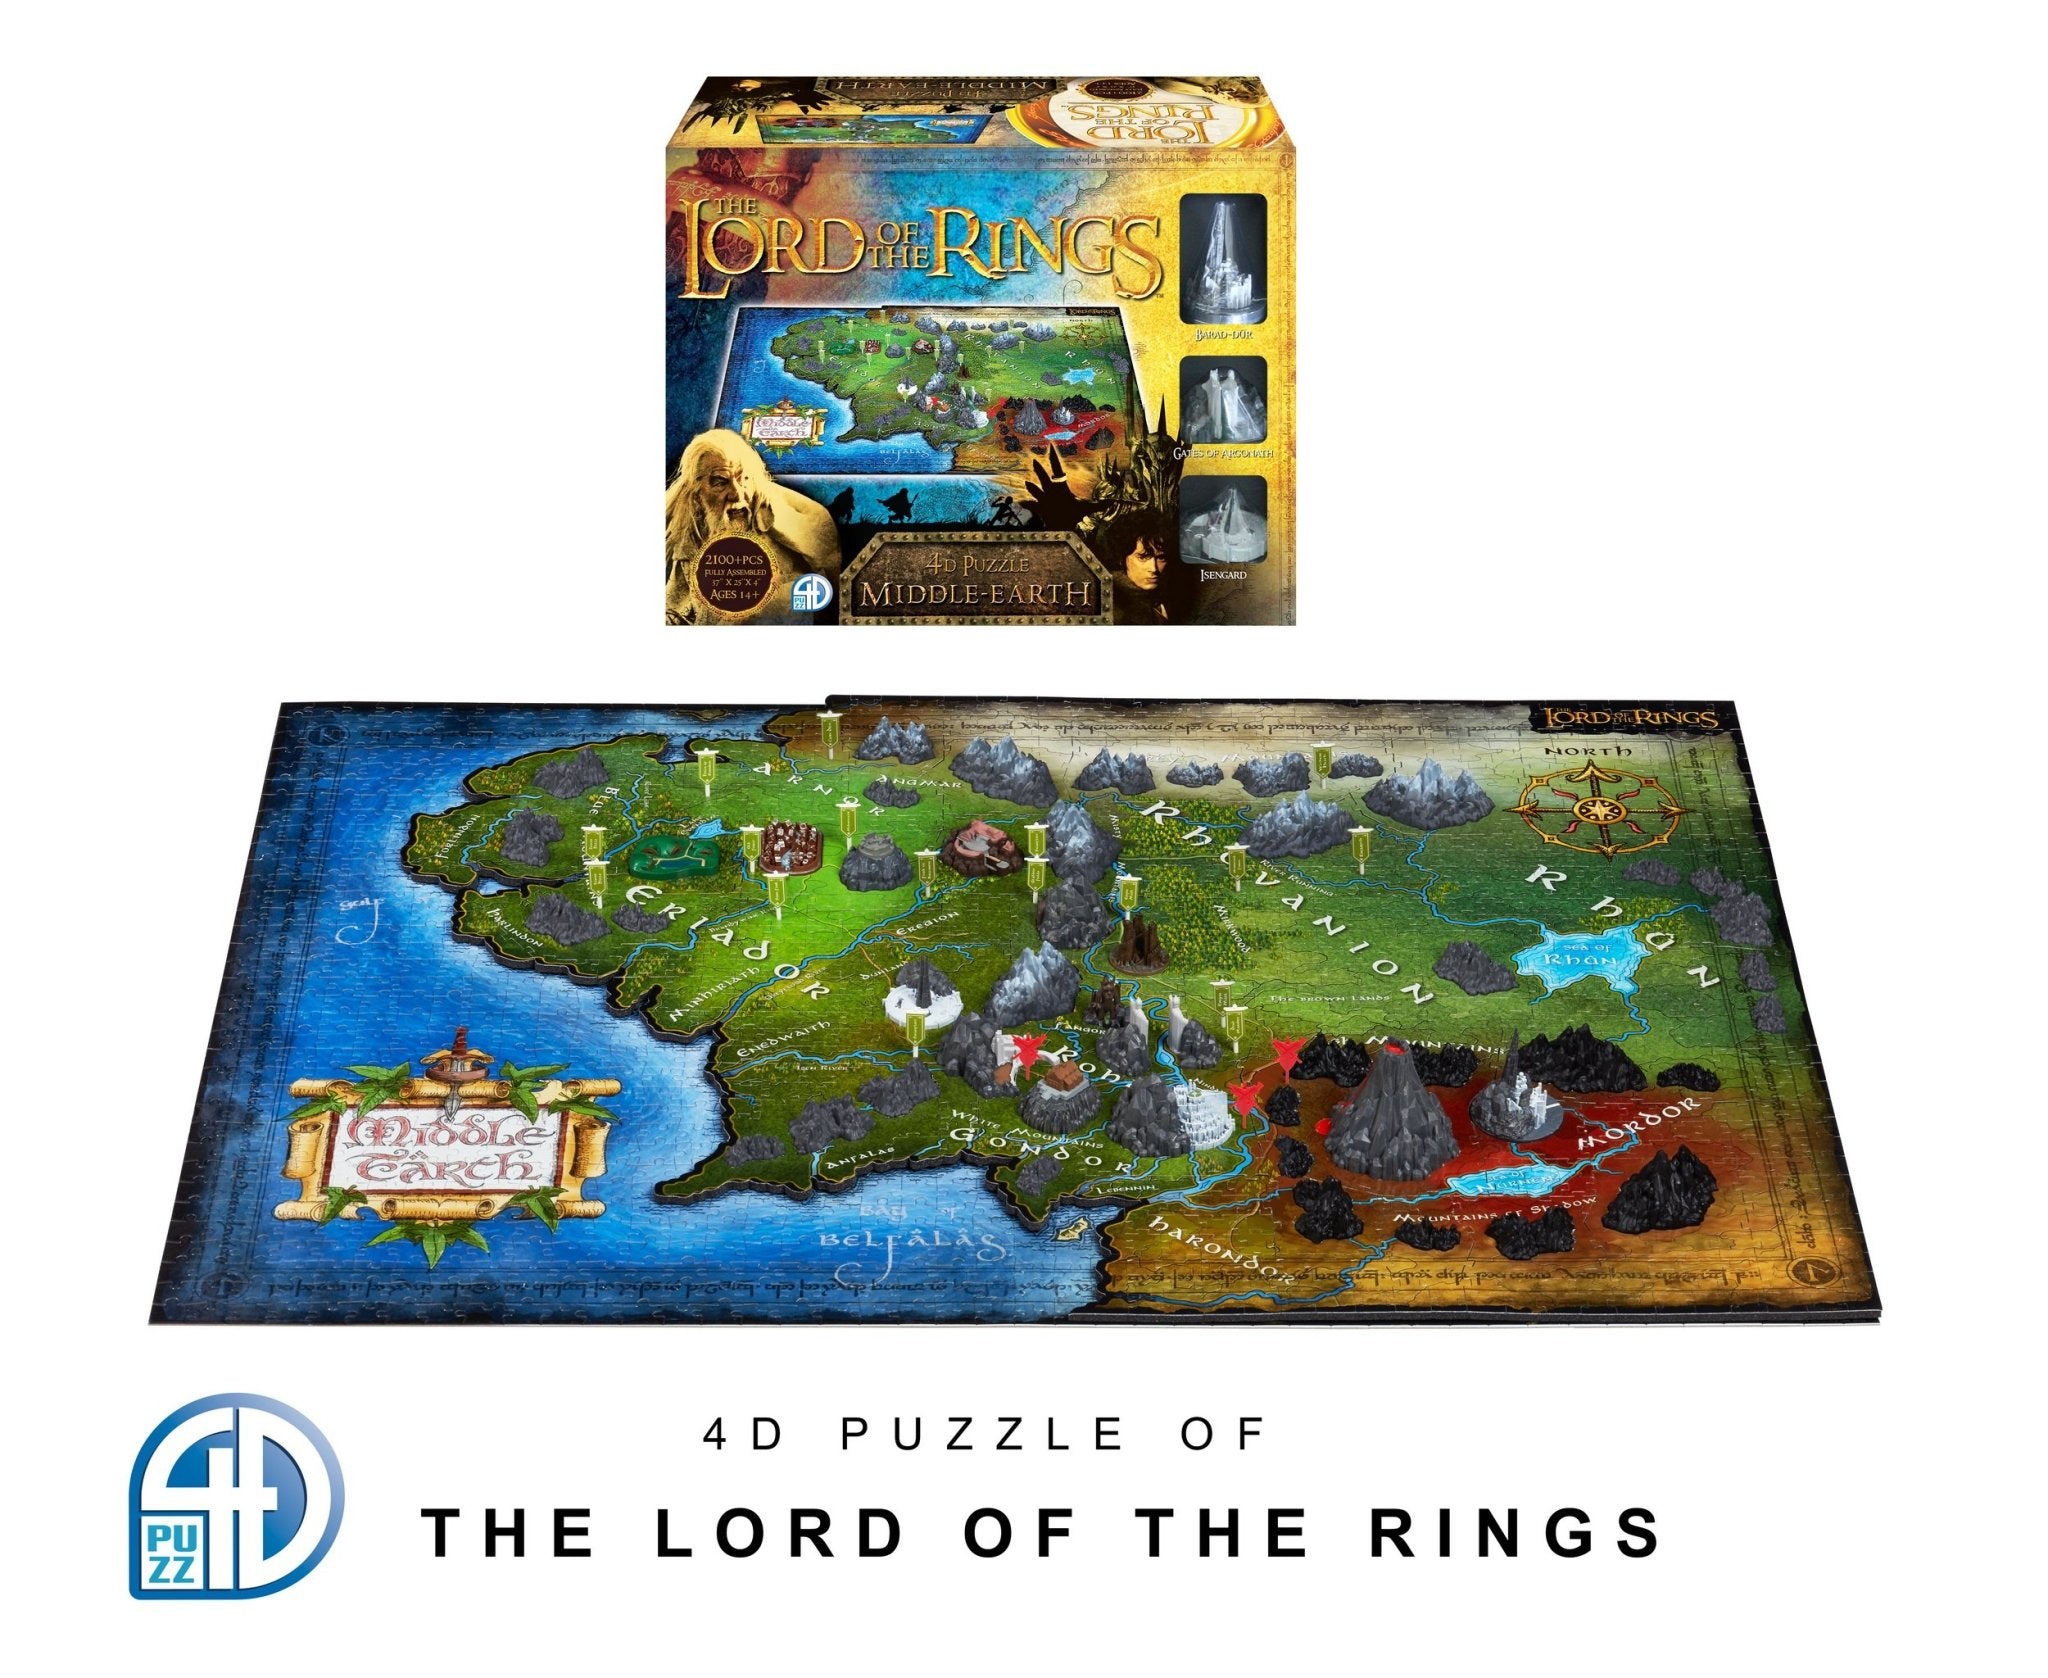 4D The Lord of the Rings Puzzle - 4DPuzz - 4DPuzz
